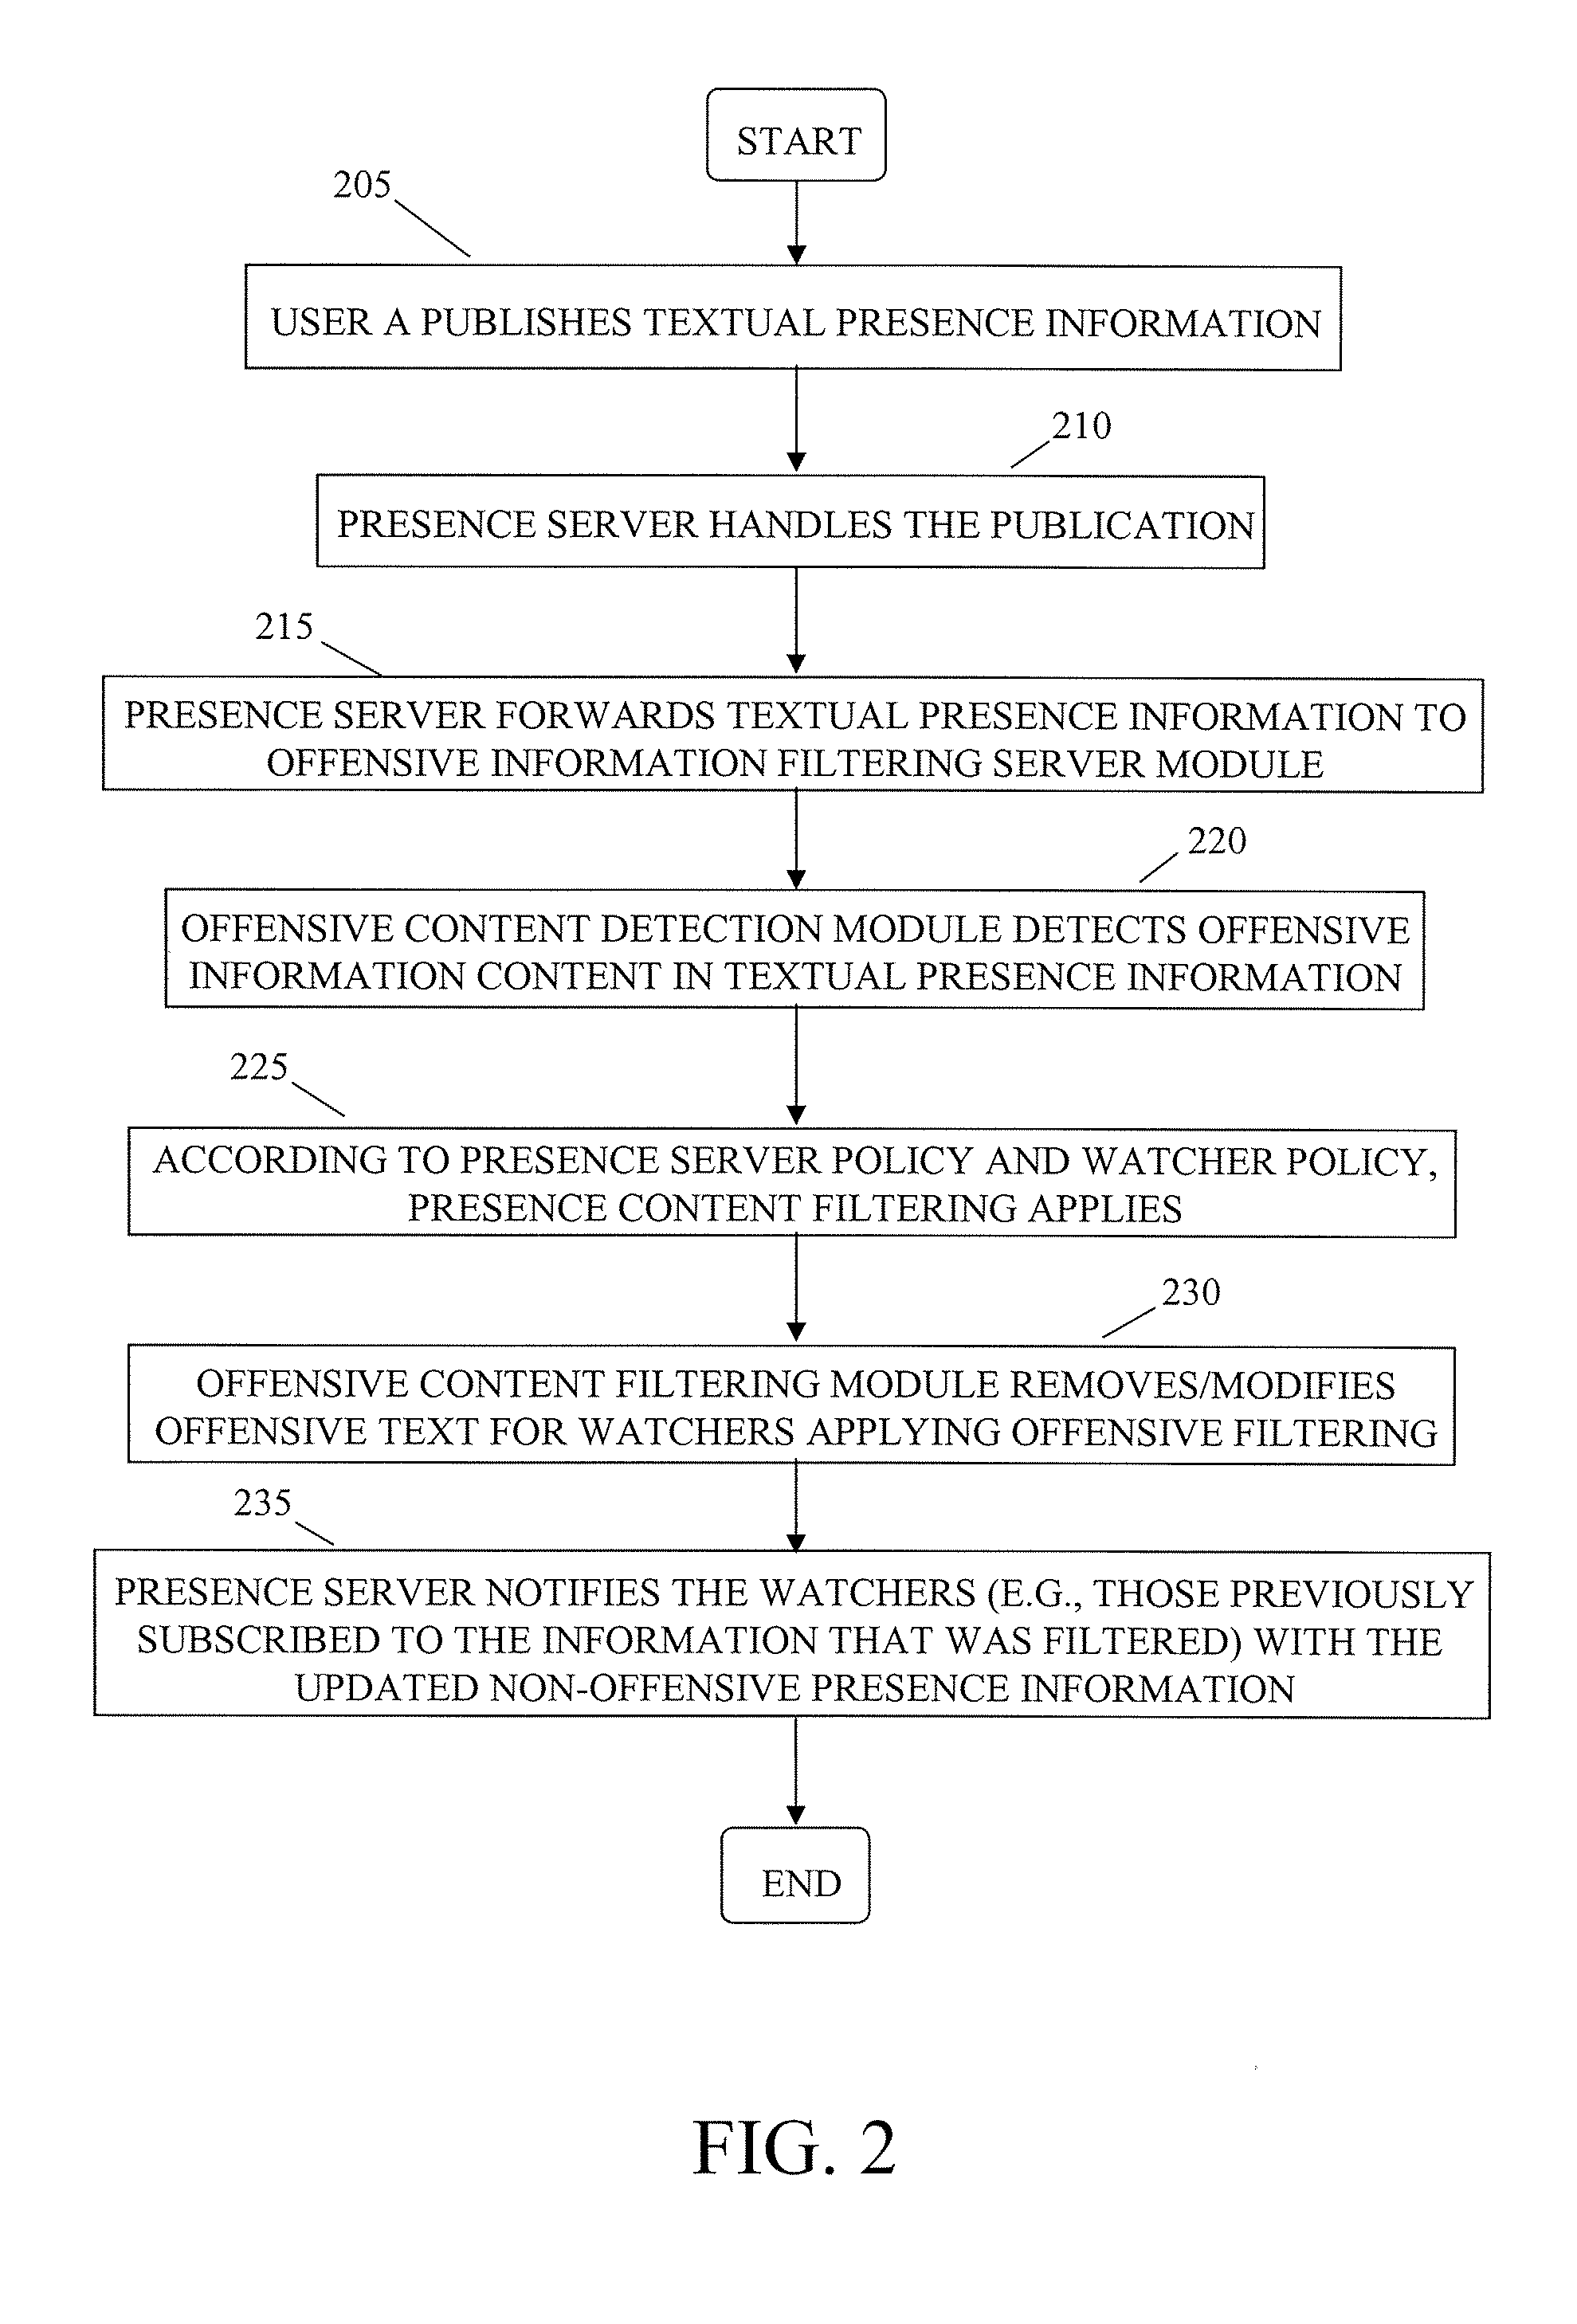 System and method for filtering offensive information content in communication systems